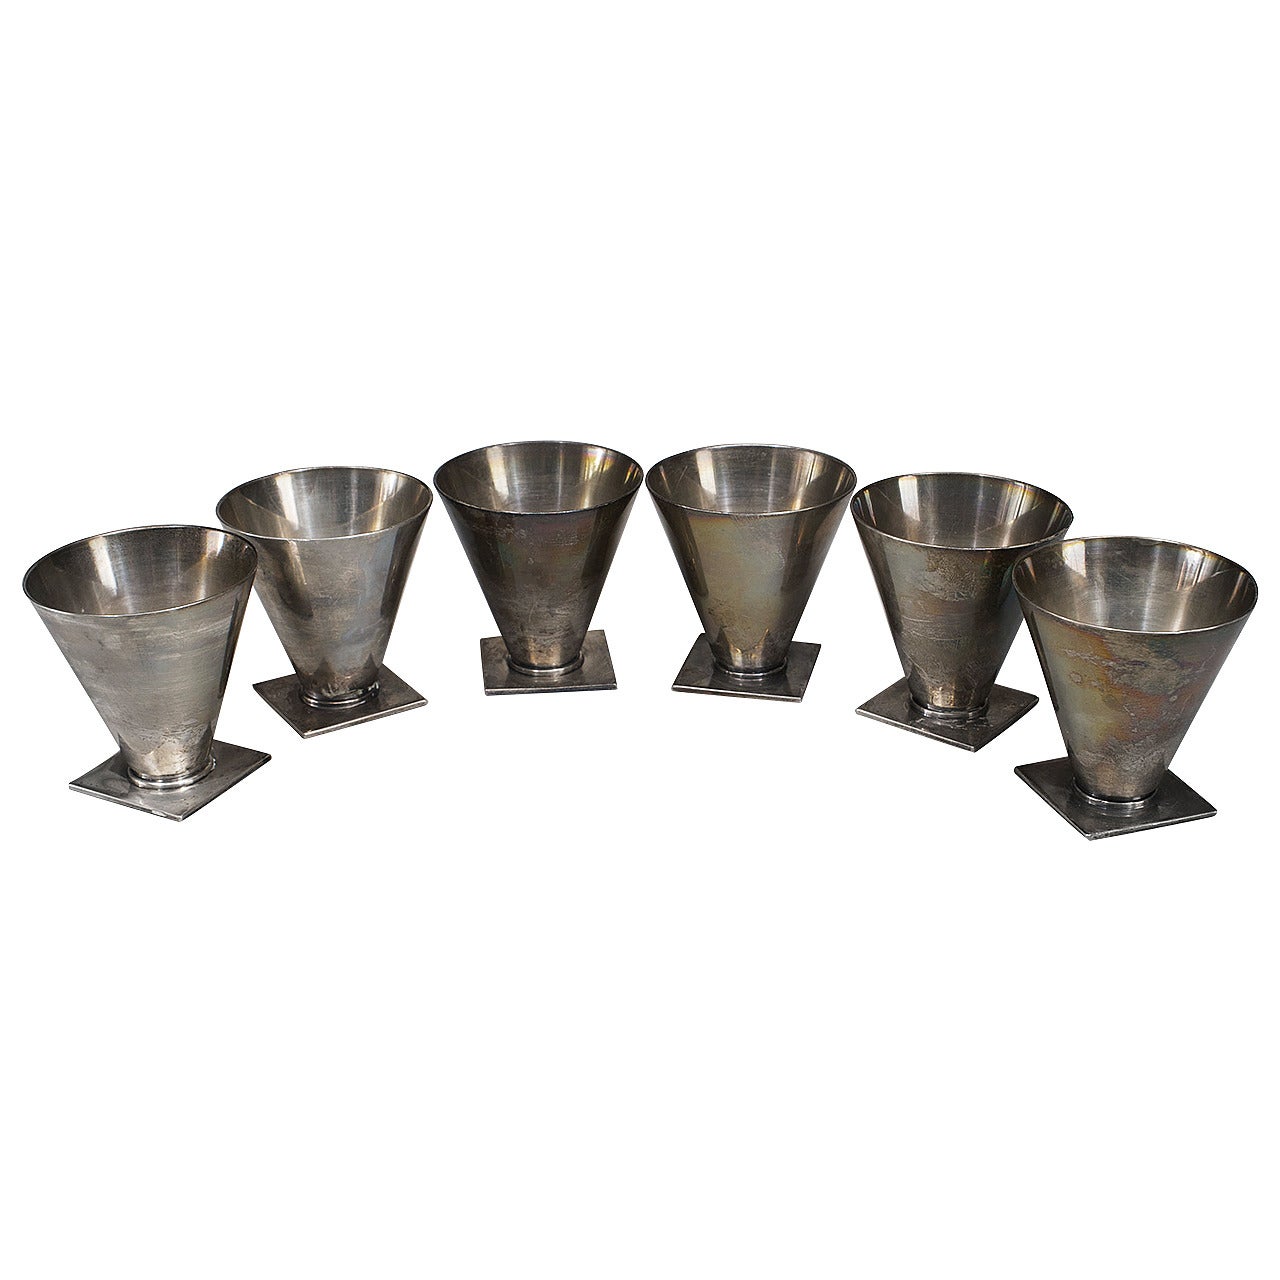 Set of 4 American Art Deco Cordial Cups For Sale